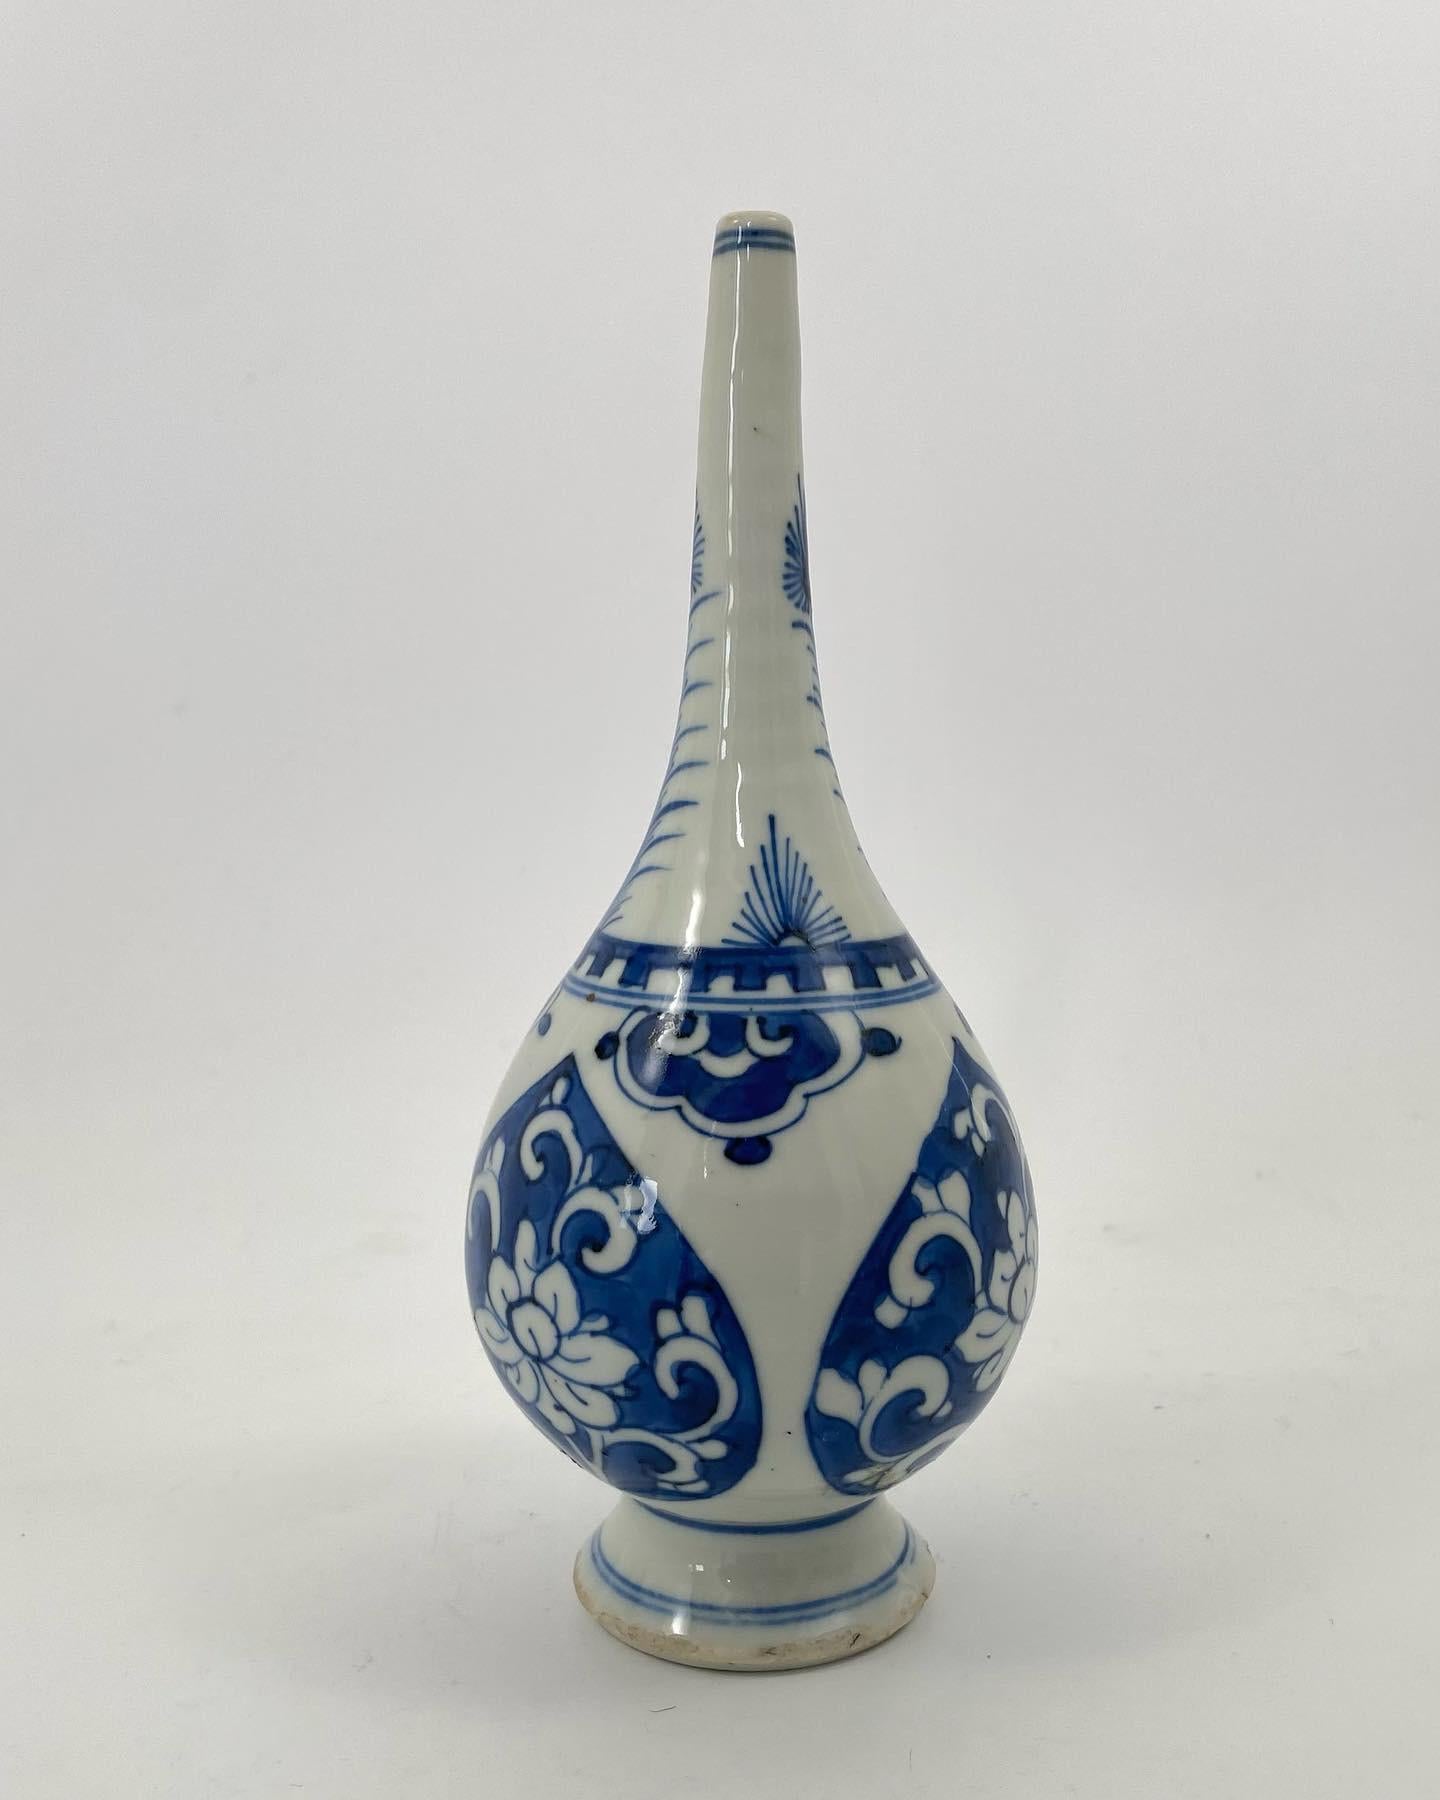 Chinese porcelain rose water sprinkler, c. 1700, Kangxi Period. The Islamic Market sprinkler, painted with shaped panels of floral scroll, in underglaze blue. Having a shoulder painted with lappets suspended from a castellated collar, beneath